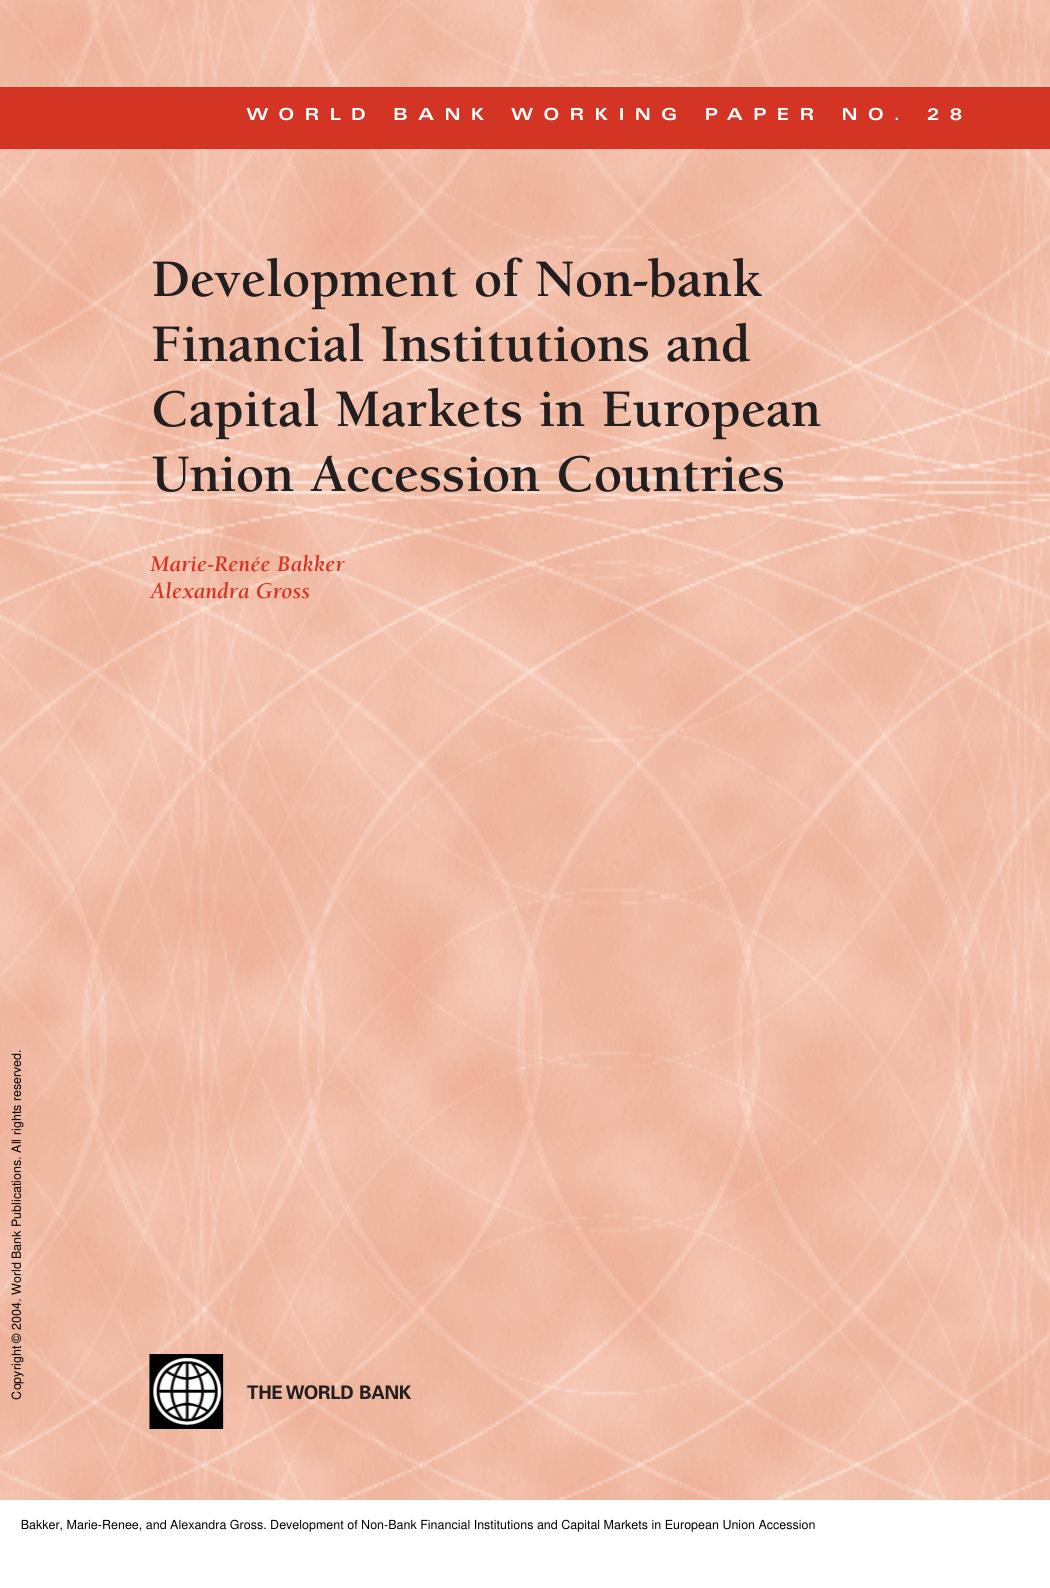 Development of Non-Bank Financial Institutions and Capital Markets in European Union Accession Countries by Marie-Renee Bakker; Alexandra Gross; World Bank Staff